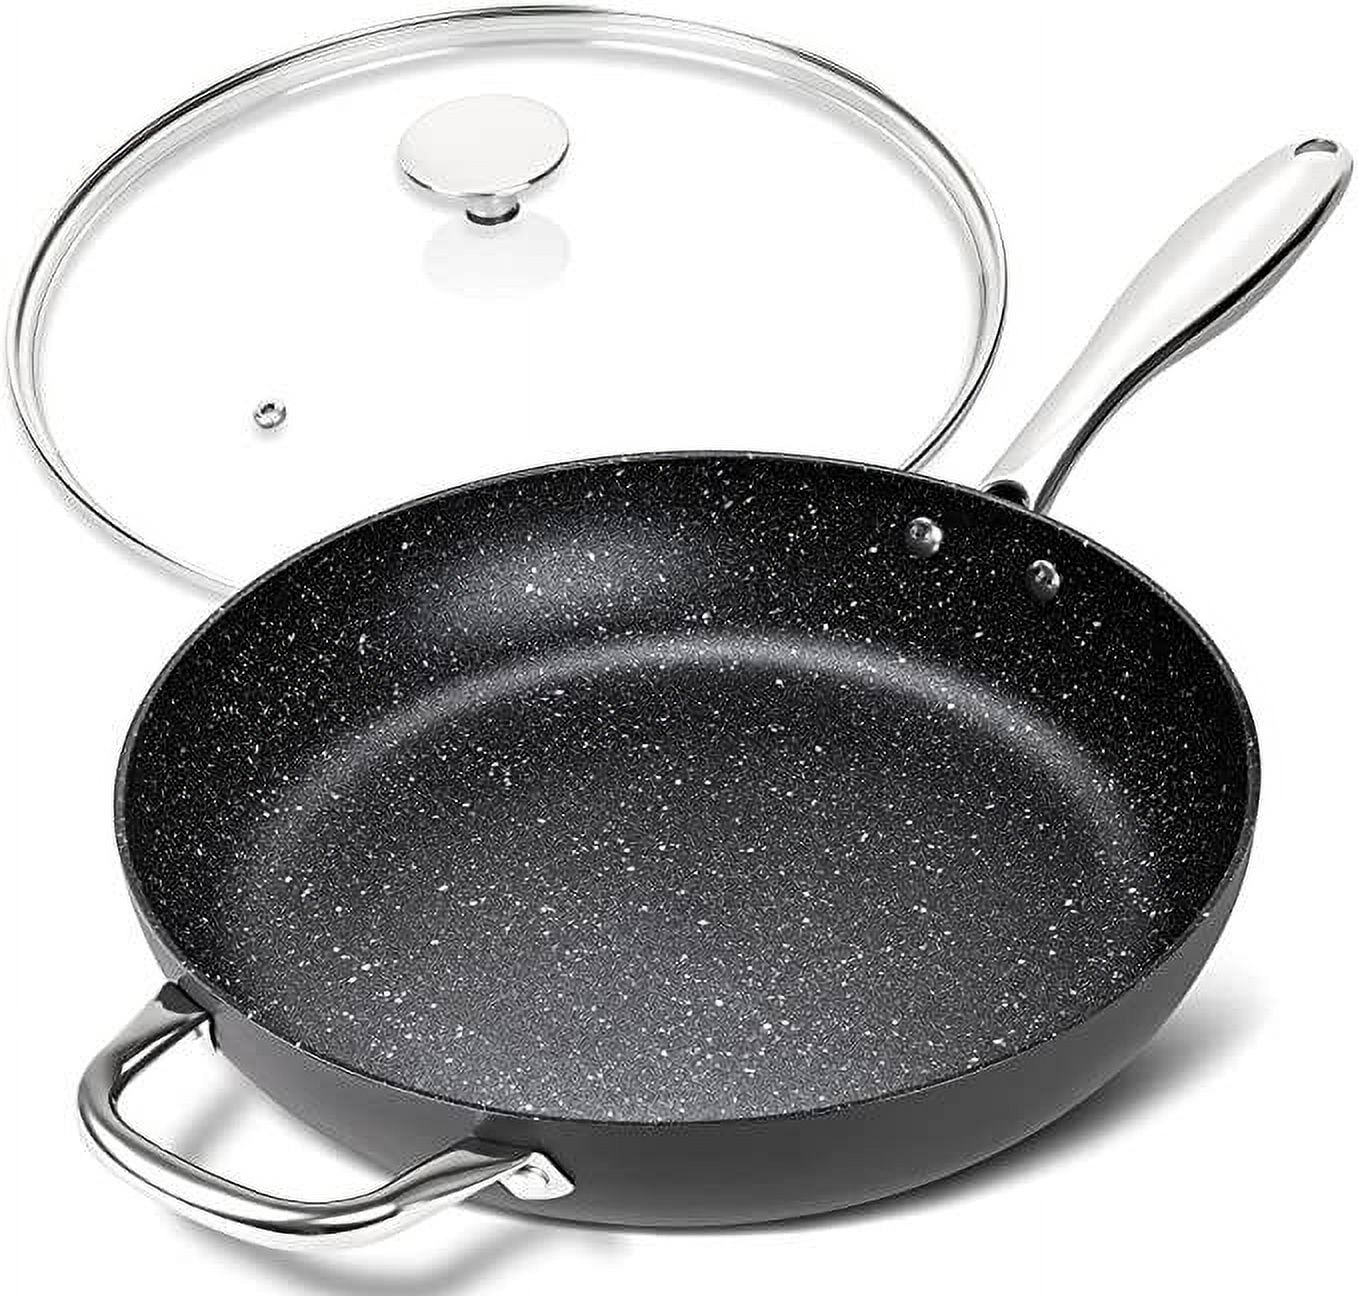 MICHELANGELO Stainless Steel Frying Pan with Lid, 9.5 Inch Frying Pan with  Nonstick Honeycomb Coating, Triply Stainless Steel Frying Pan, Steel Fry Pan  with Lid, Induction Compatible - 9.5 Inch 